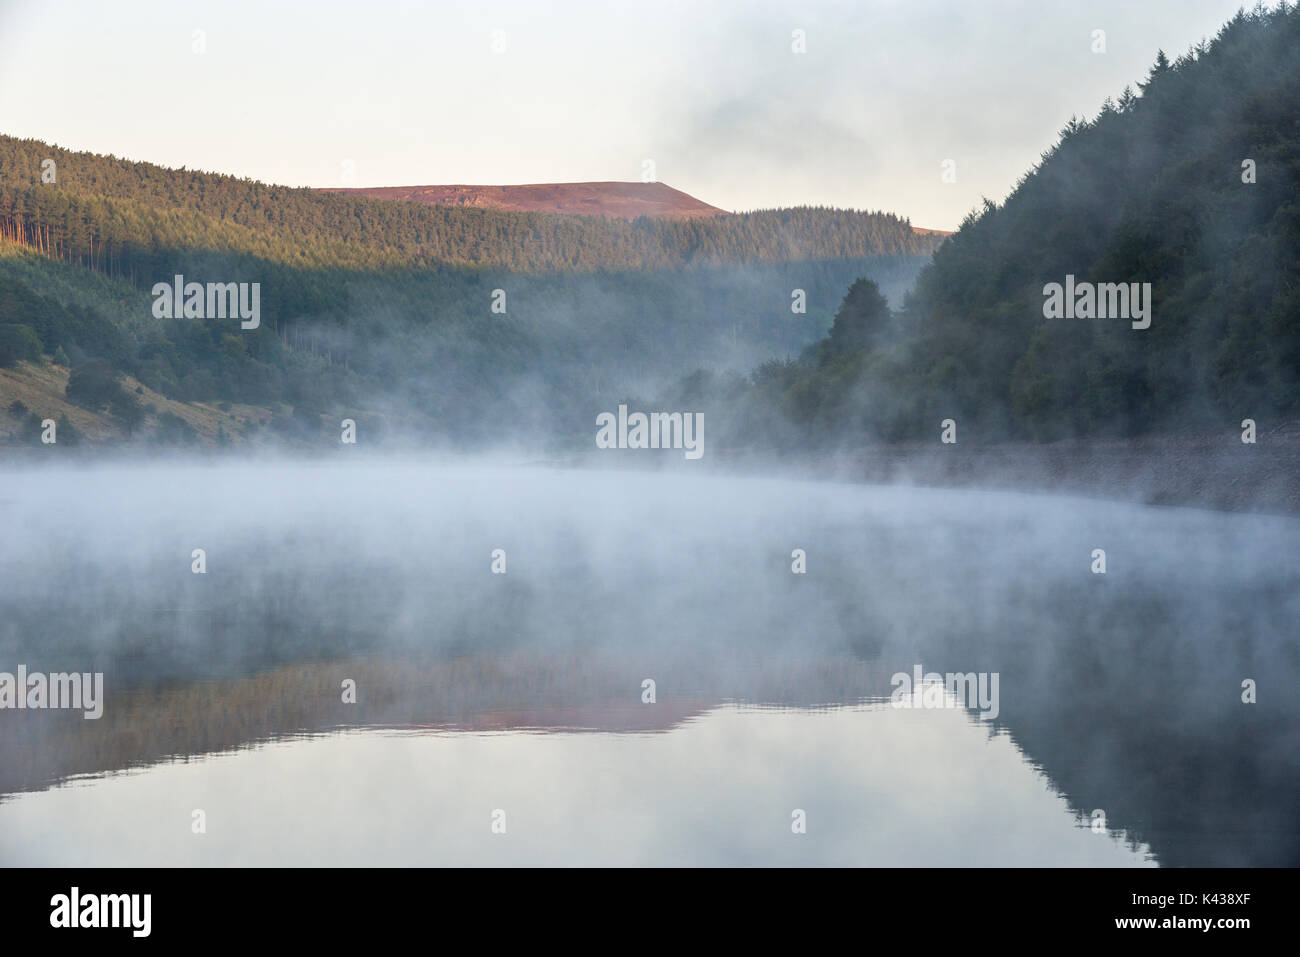 Stunning September morning at Ladybower reservoir, Peak District, Derbyshire, England. Mist drifting over the water surface. Stock Photo